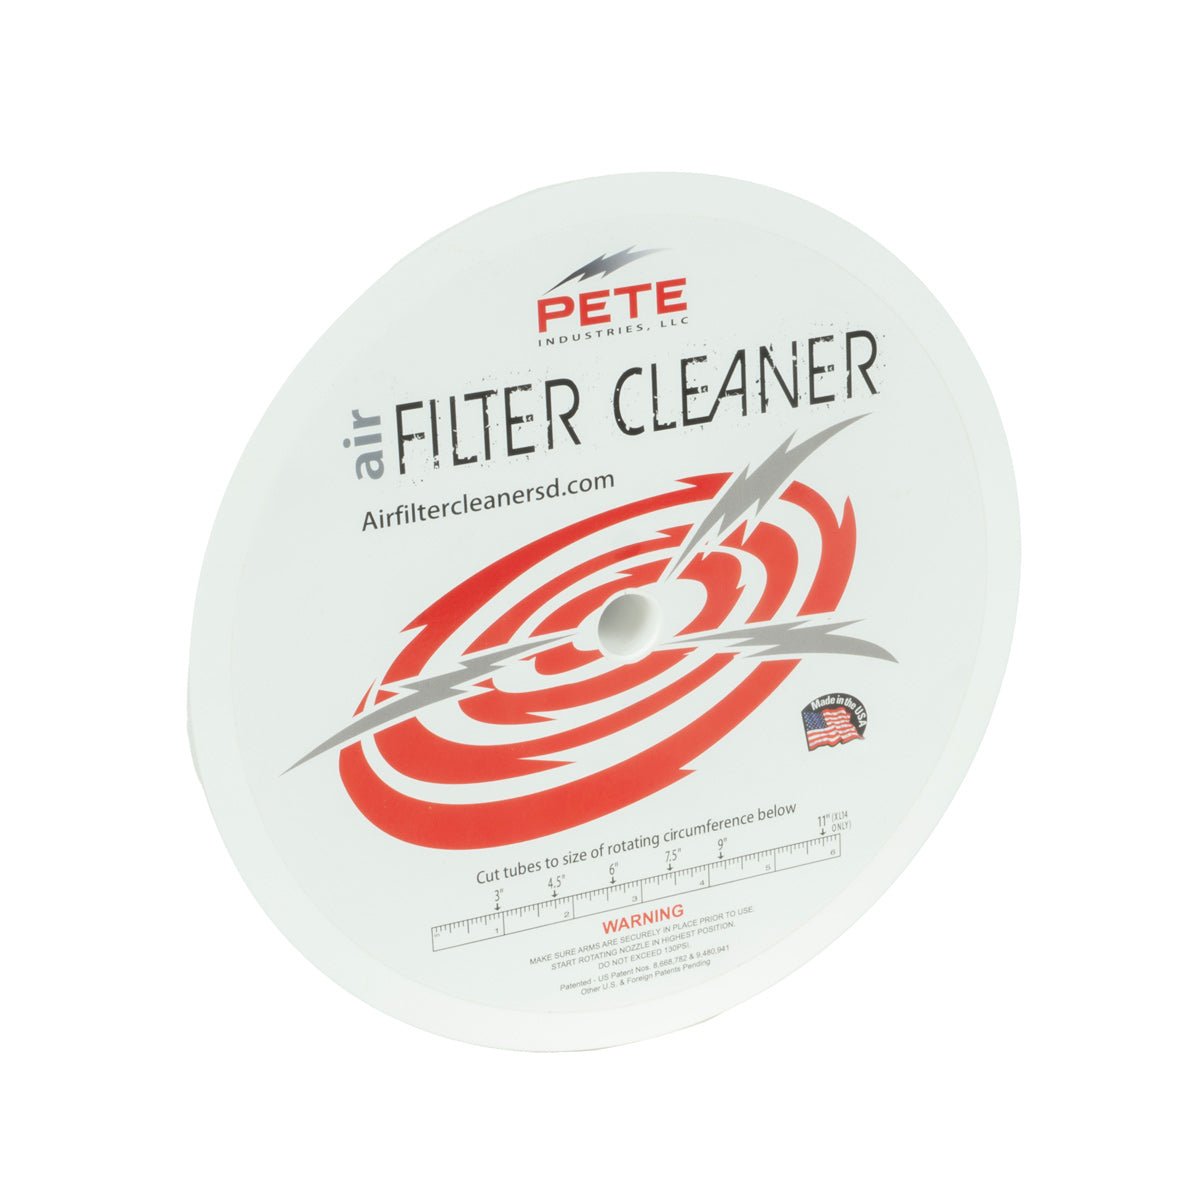 Air Filter Cleaner LID STICKER | Air Filter Cleaner